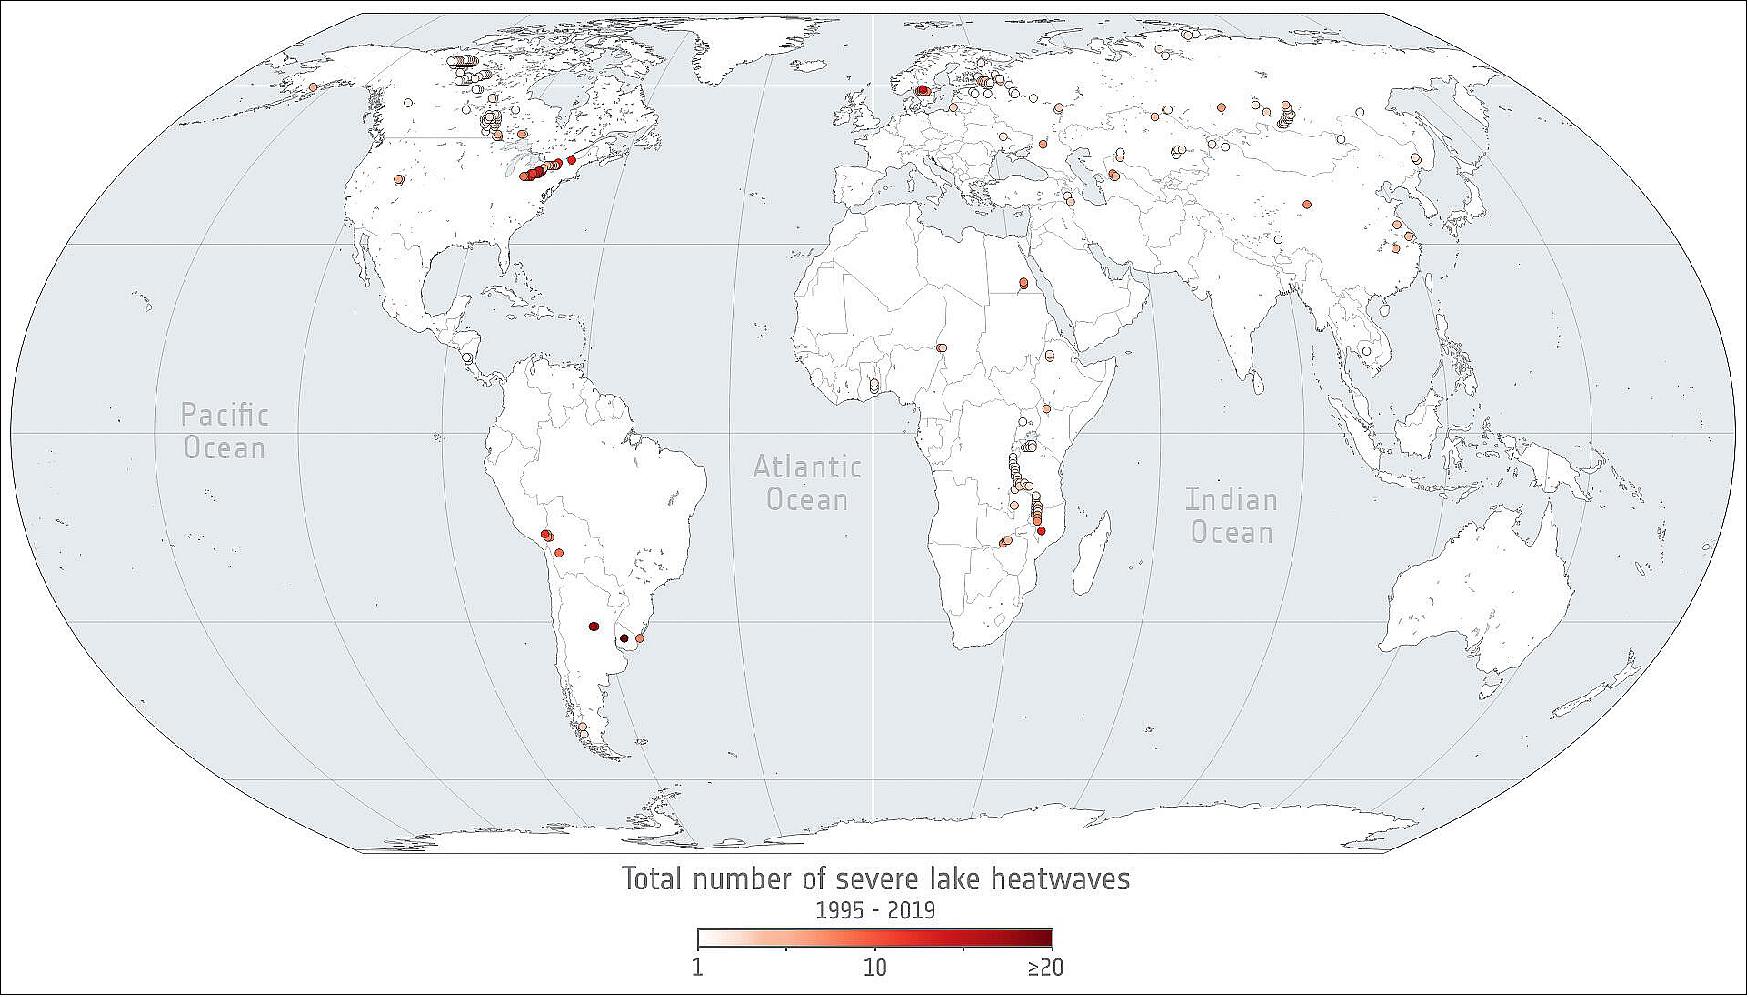 Figure 1: Global view of extreme lake heatwaves. According to a new study published today, the world's largest lakes are being hit by severe heatwaves six times as frequently as they were around two decades ago. The global map pinpoints the exact location of the lakes experiencing extreme heatwaves [image credit: ESA (Data: Woolway et al., 2022)]